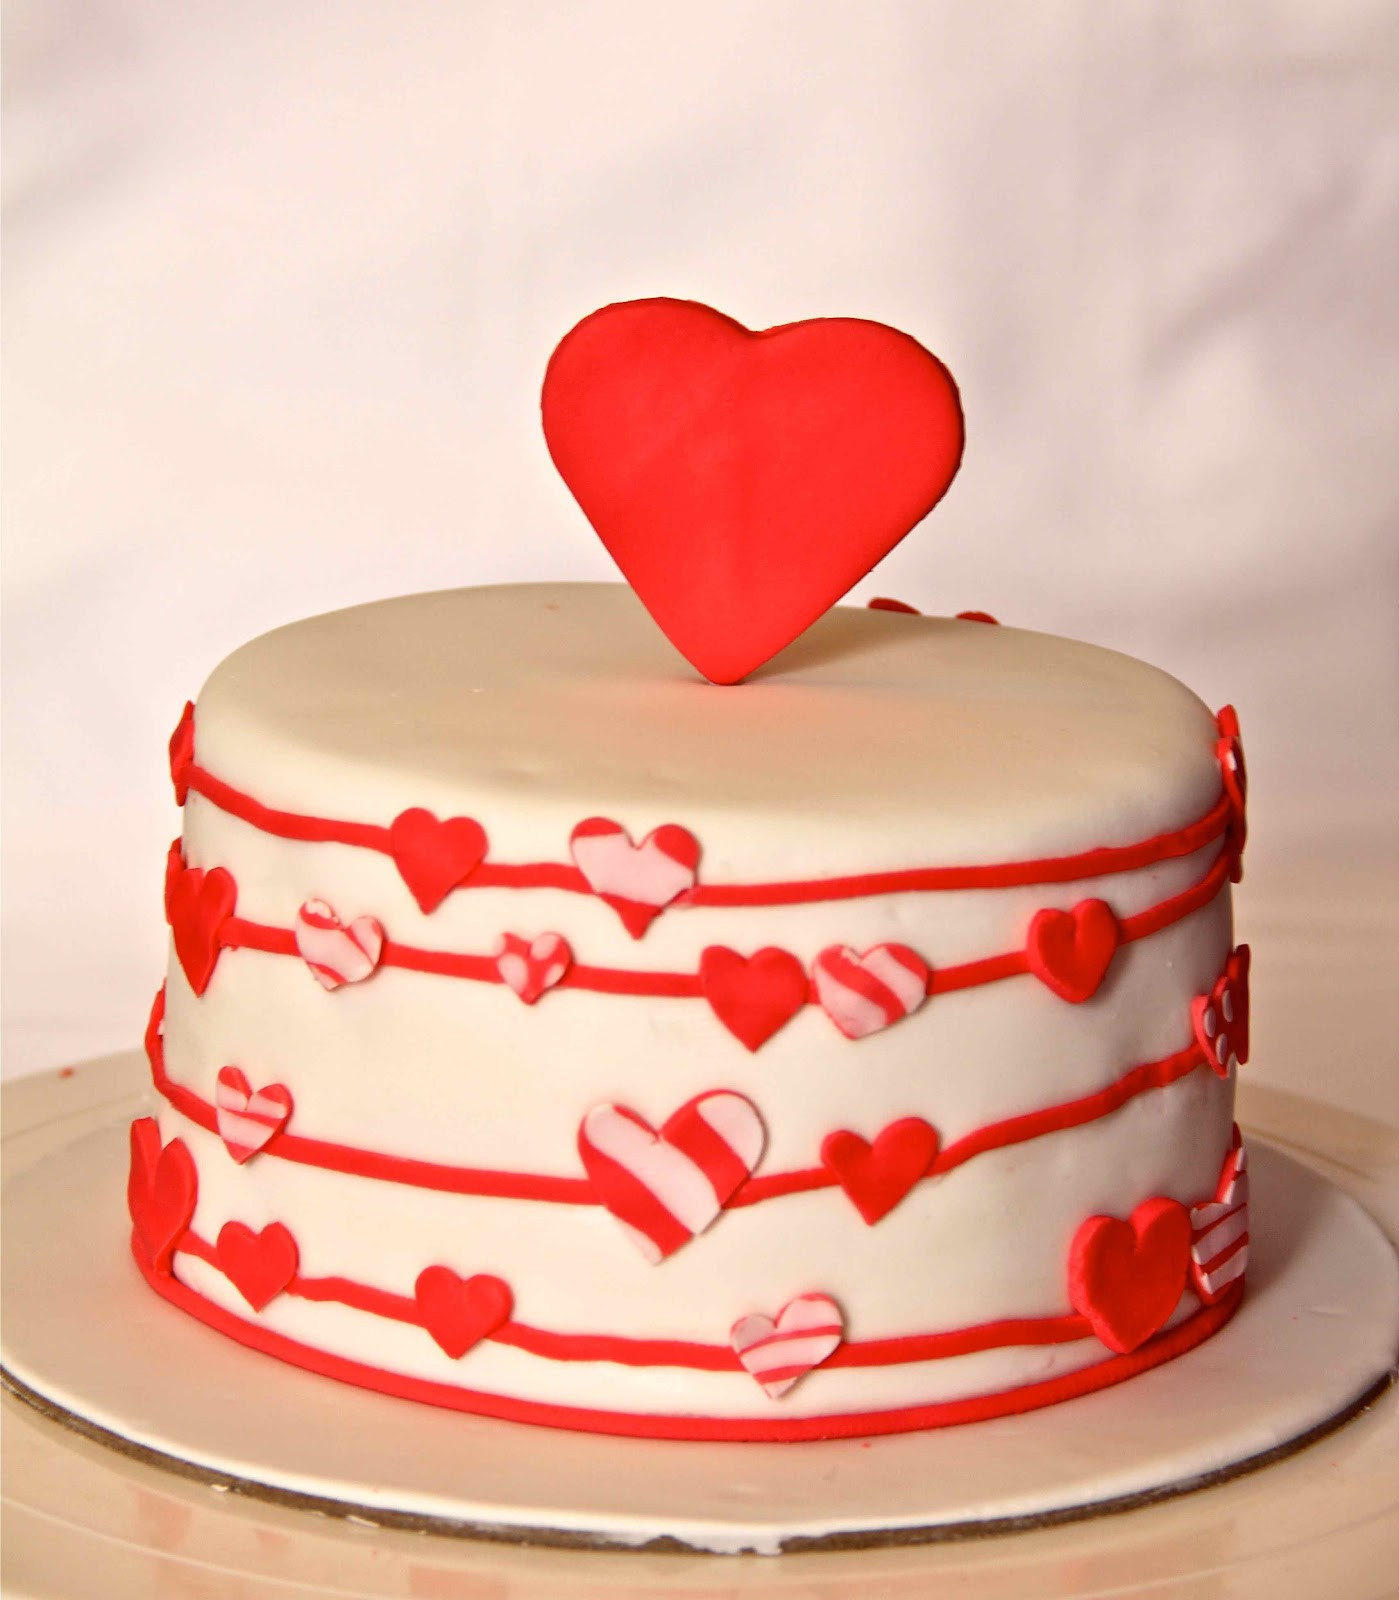 Valentines Day Cake Ideas
 BAKE YOUR HEART WITH THESE LOVELY VALENTINE CAKE